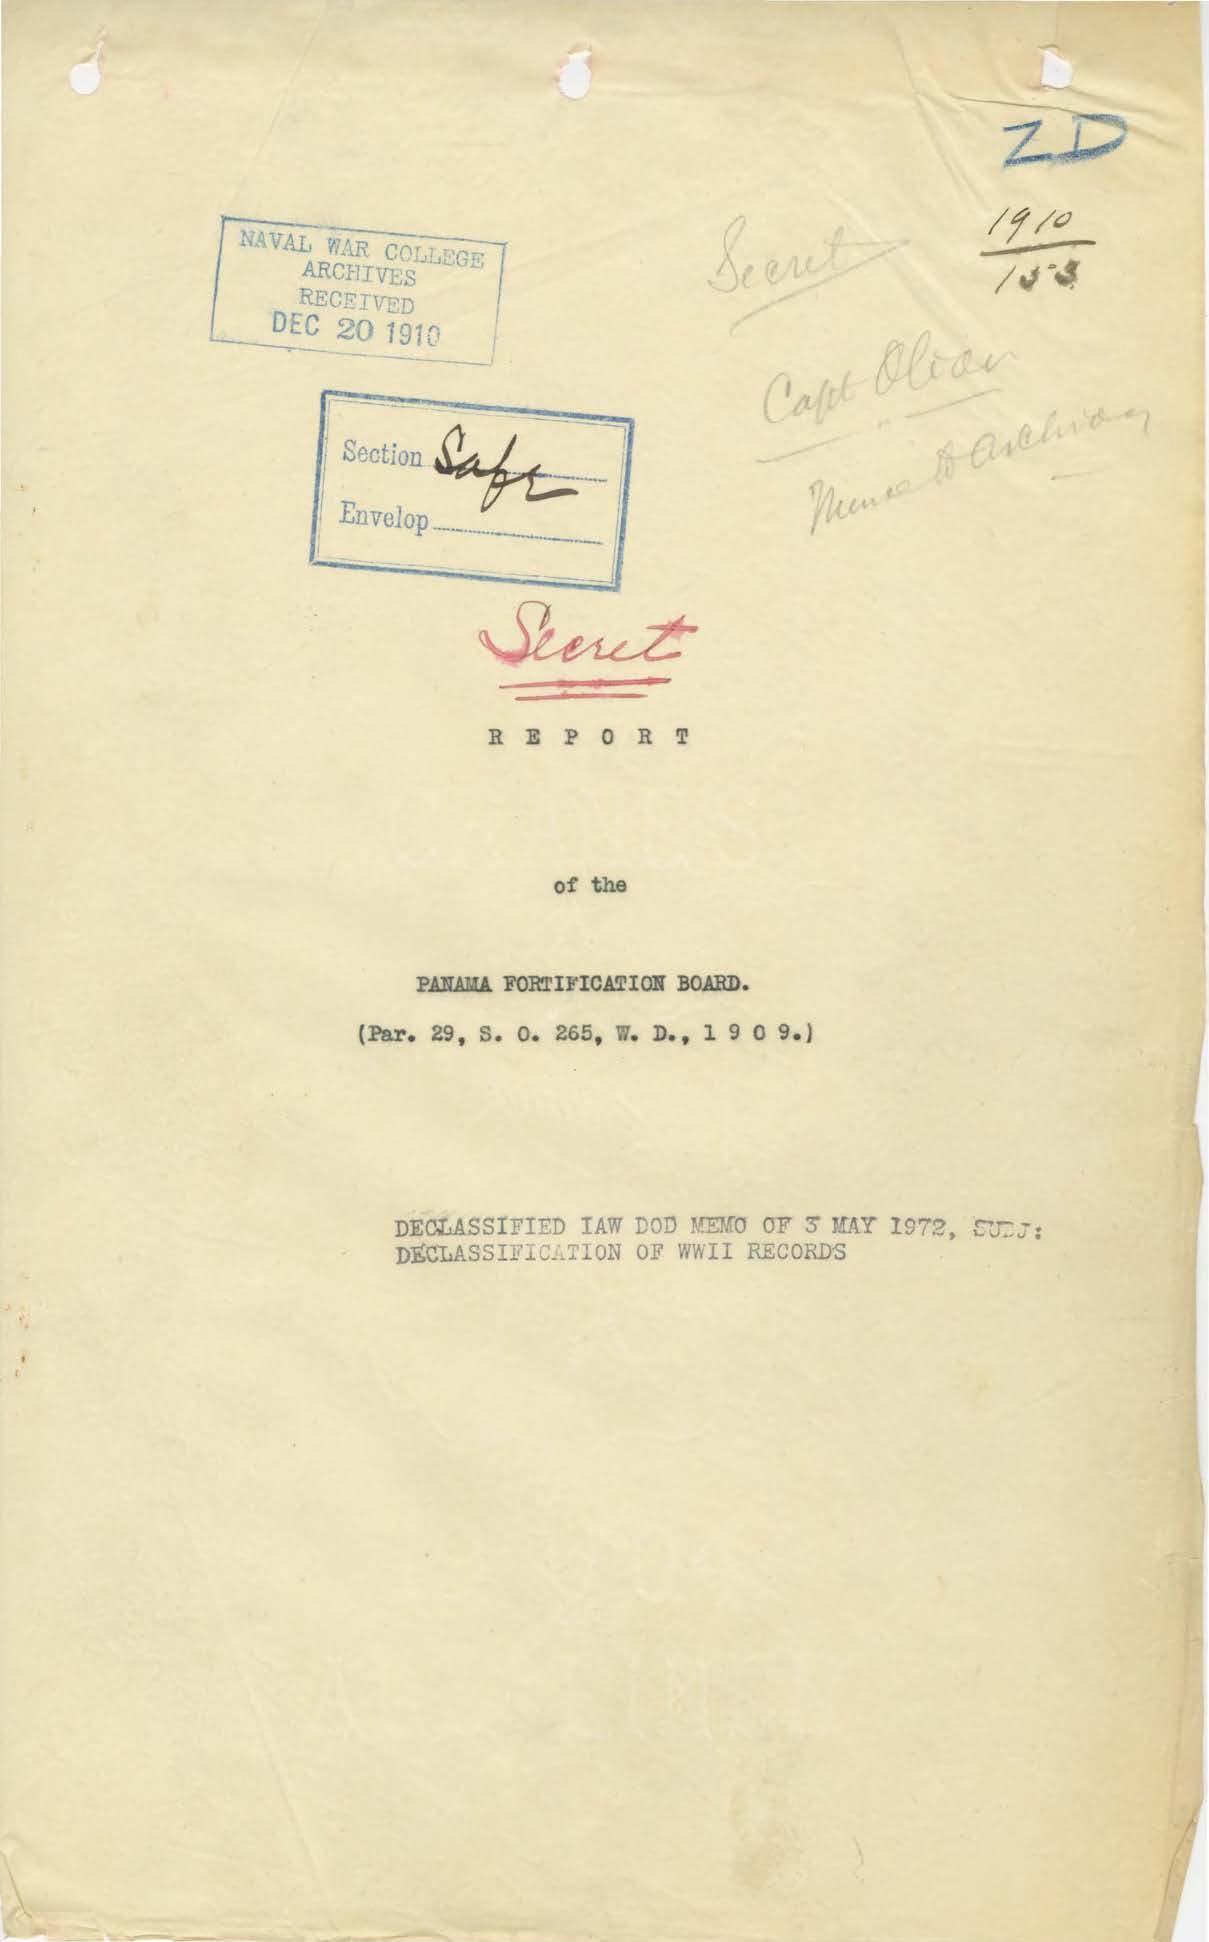 Report of the Panama Fortification Board; William Crozier, W. W. Wetherspoon, H. S. Knapp, and W. J. Maxwell